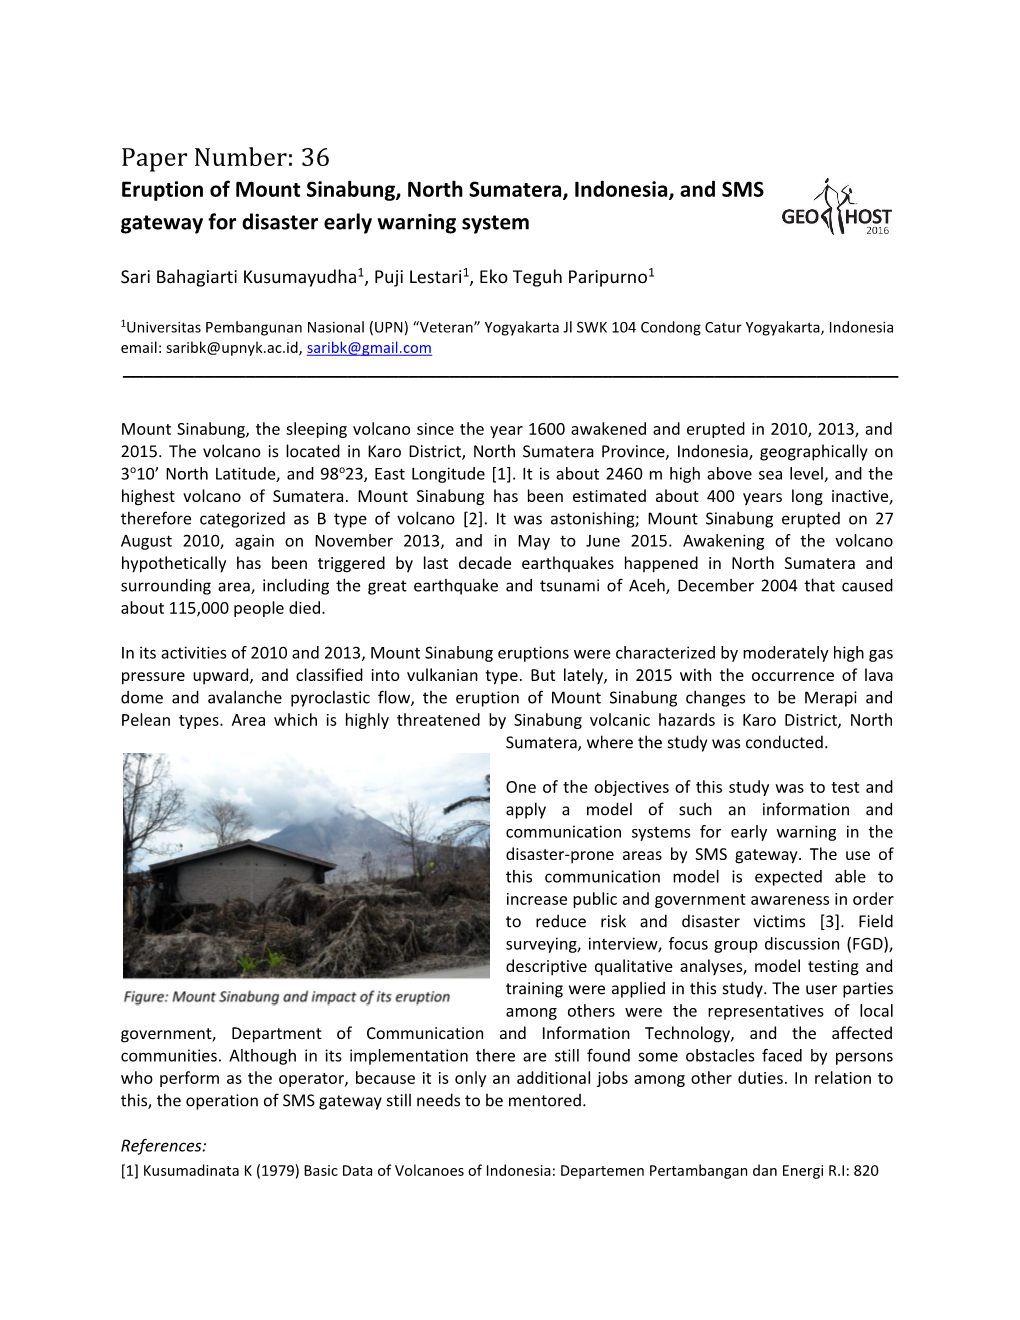 Paper Number: 36 Eruption of Mount Sinabung, North Sumatera, Indonesia, and SMS Gateway for Disaster Early Warning System